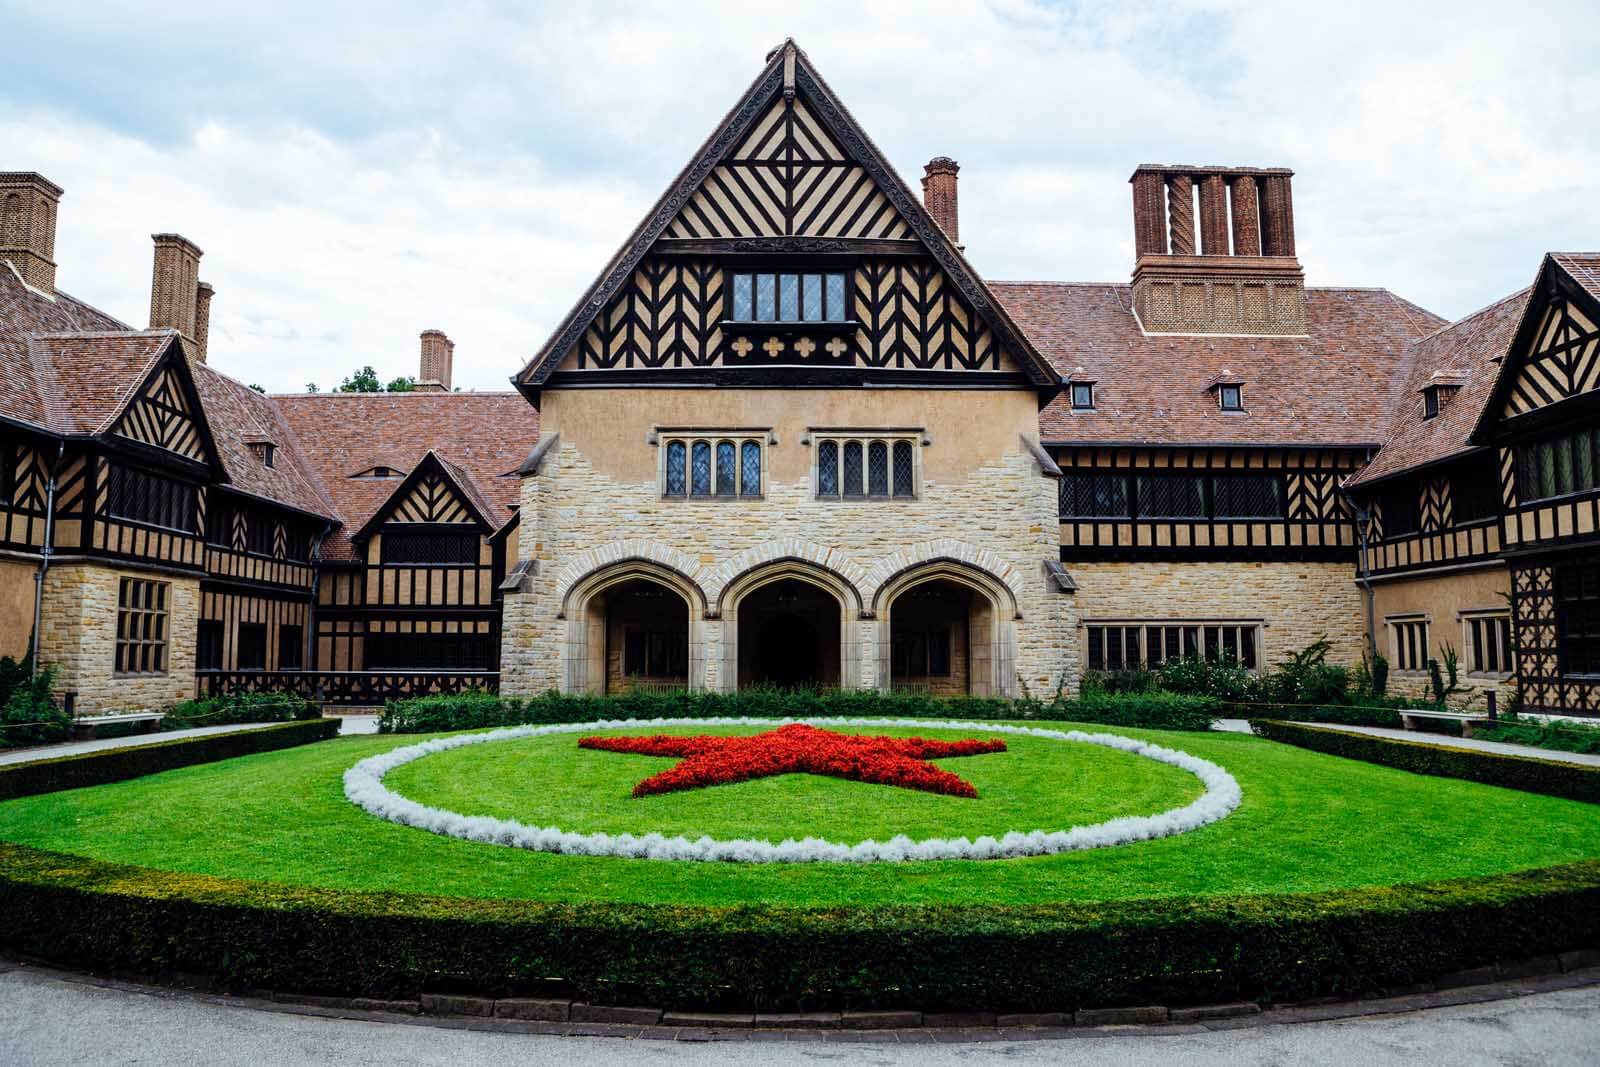 exterior of Cecilienhof Palace where the Potsdam Conference was held in 1945